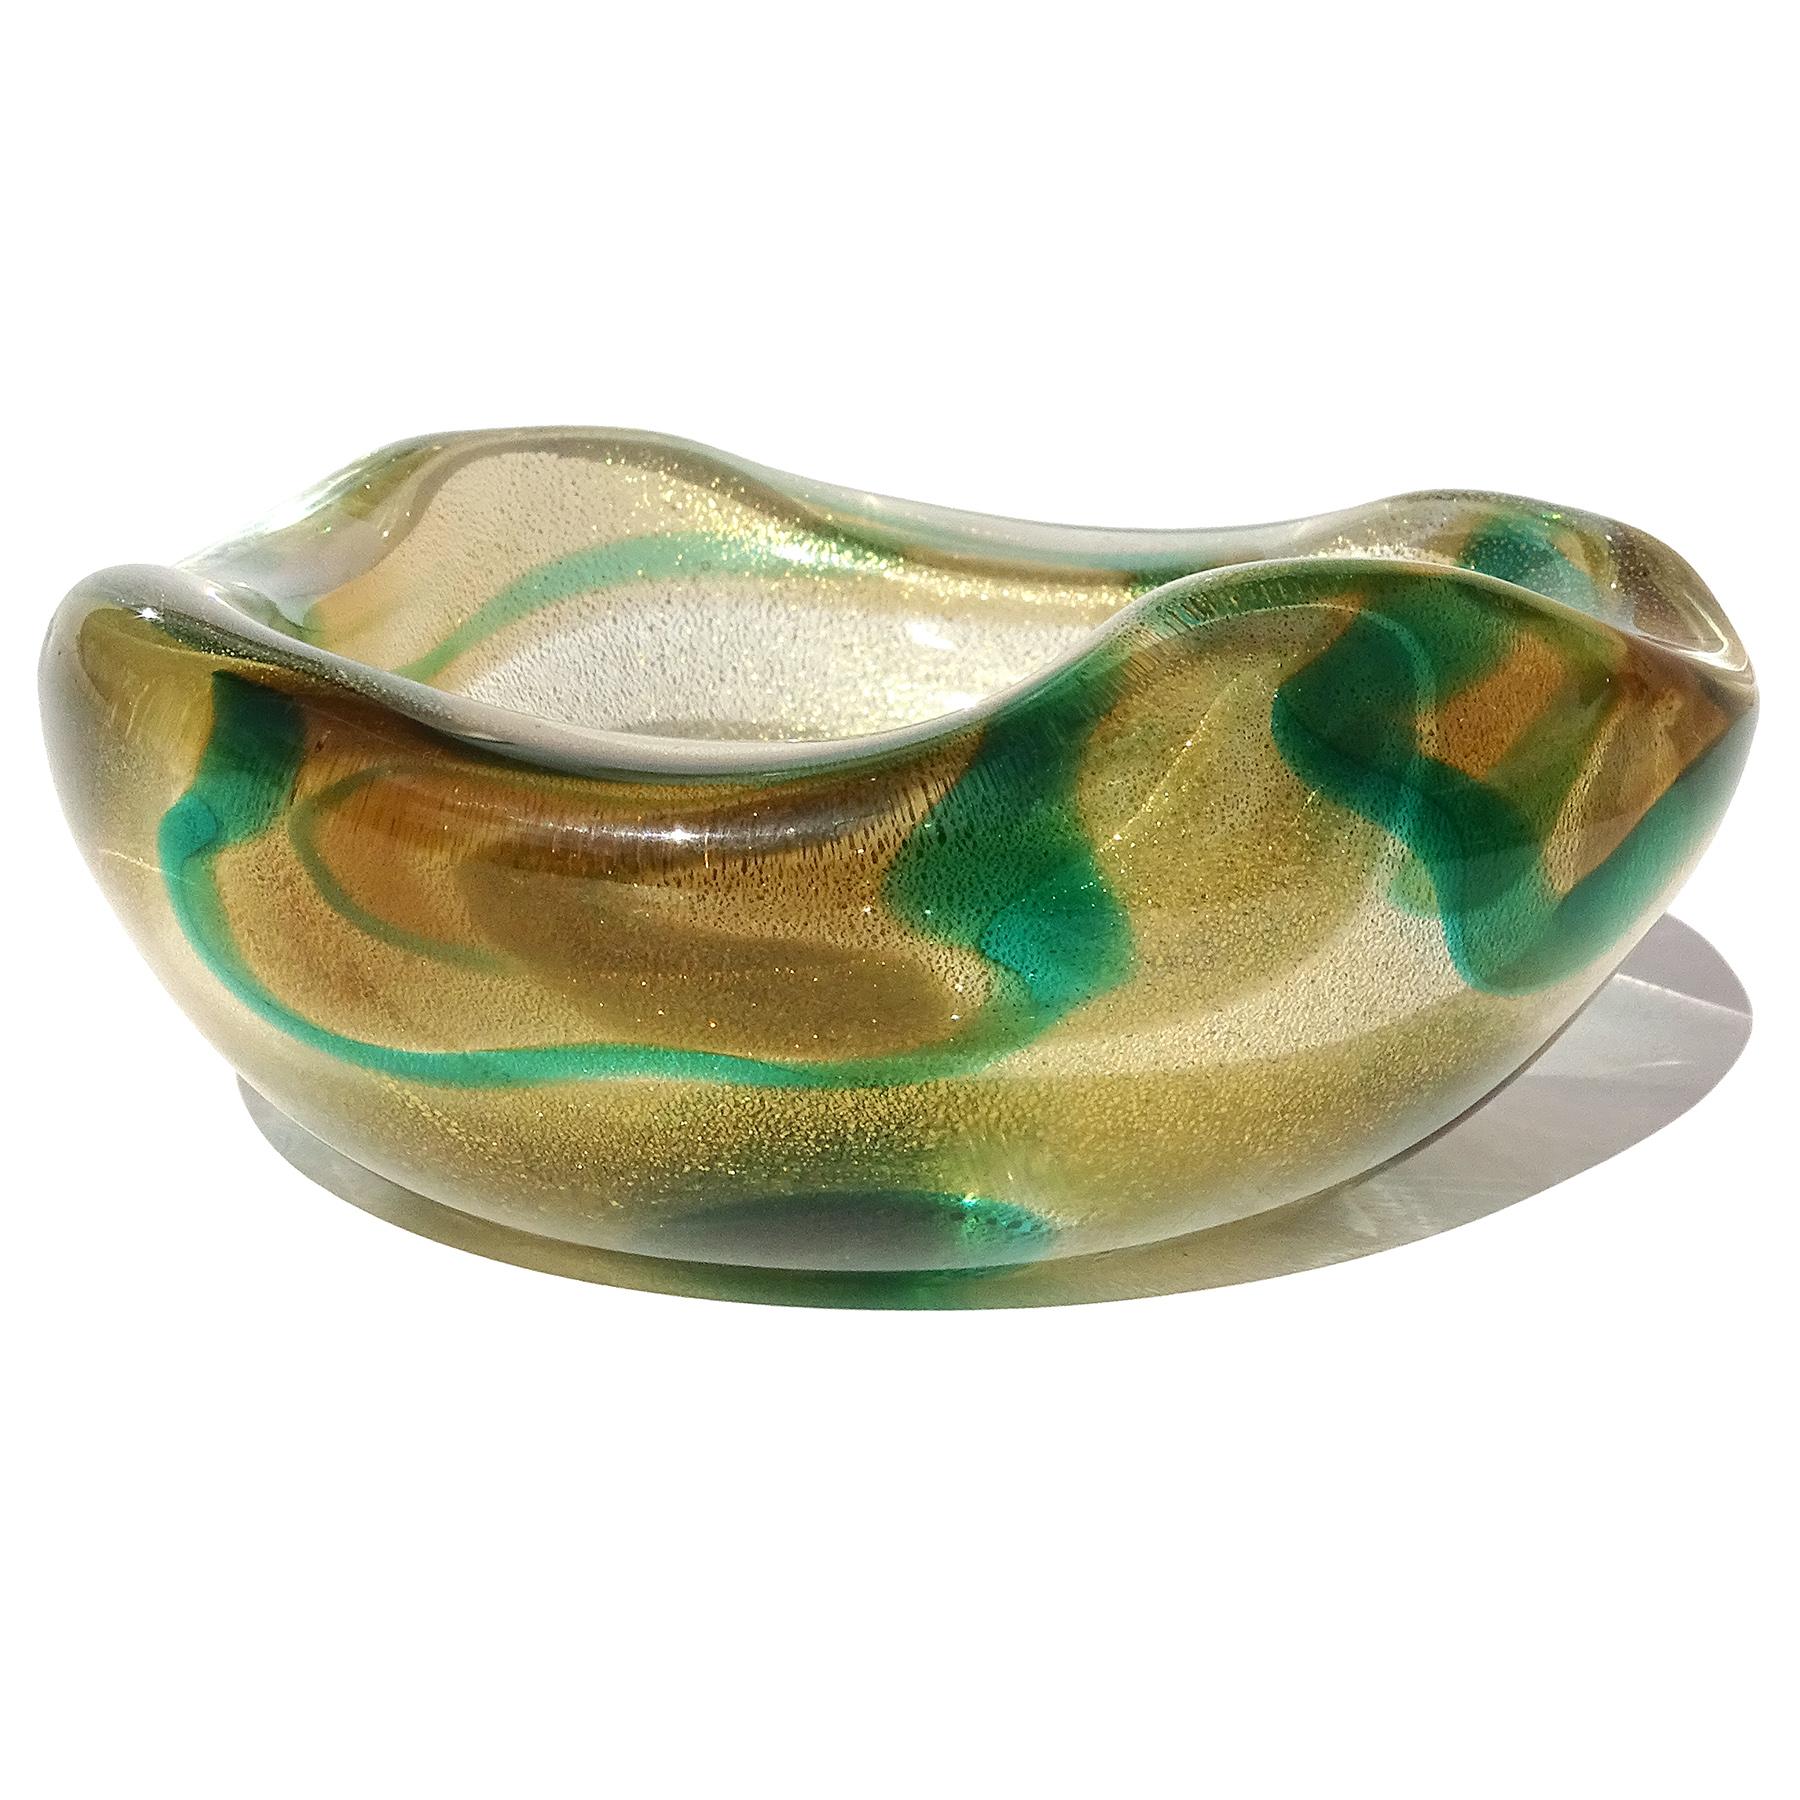 Beautiful vintage Murano hand blown Sommerso green, orange amber spots and gold flecks Italian art glass decorative bowl. Documented to designer Archimede Seguso, circa 1952. This design has been published in many Seguso books and catalogs. The bowl